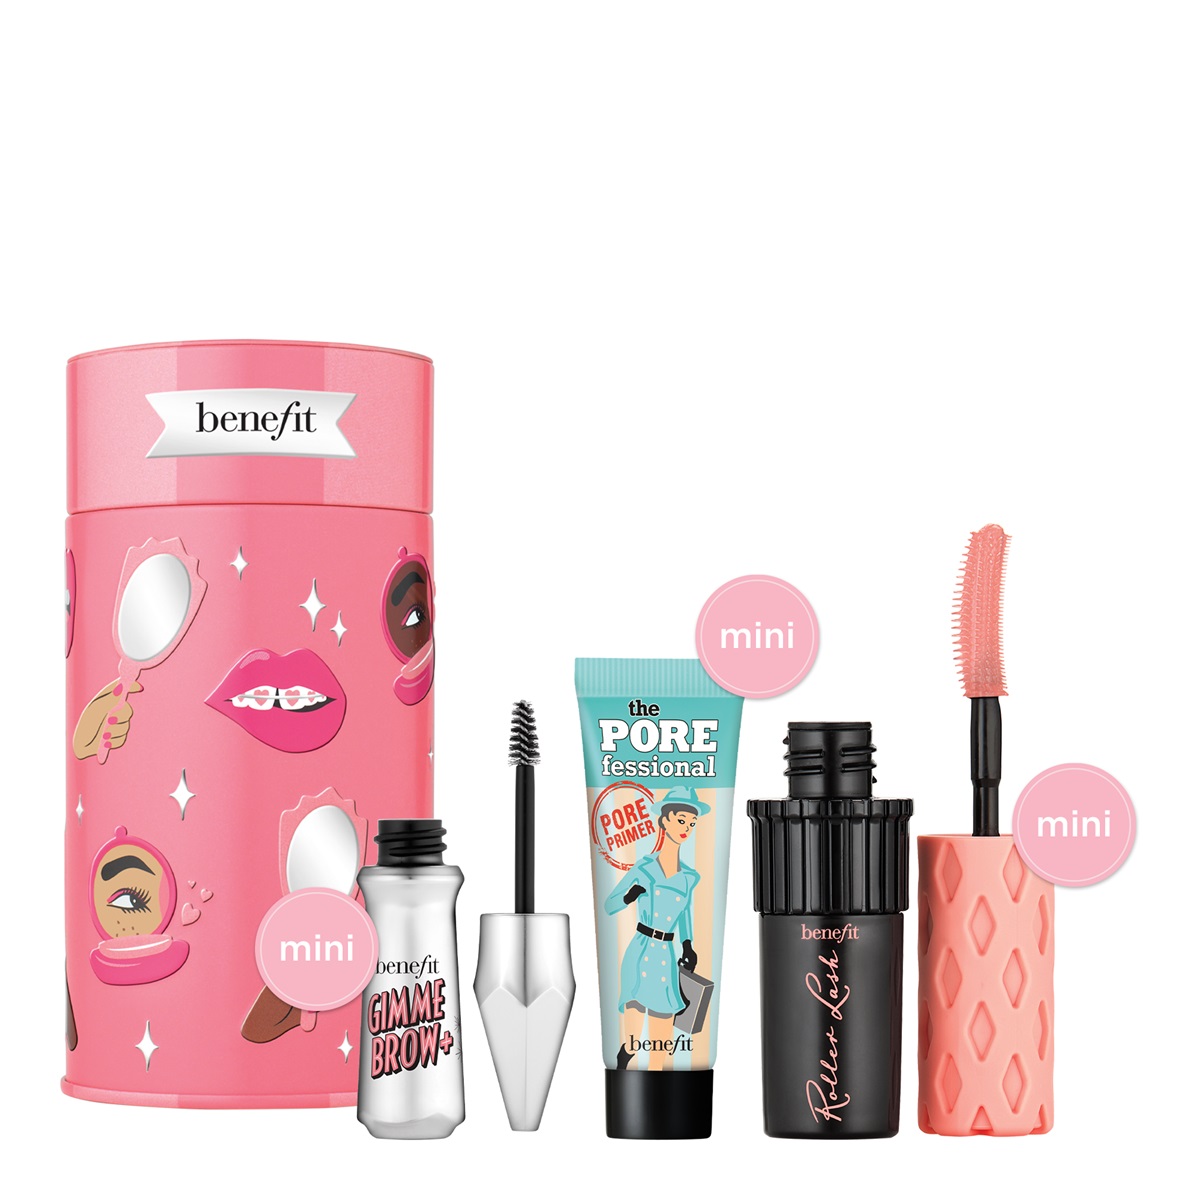 Benefit Cosmetics: Get Your Free Mascara, POREfessional & Precisely, My Brow Pencil When You spend £50+